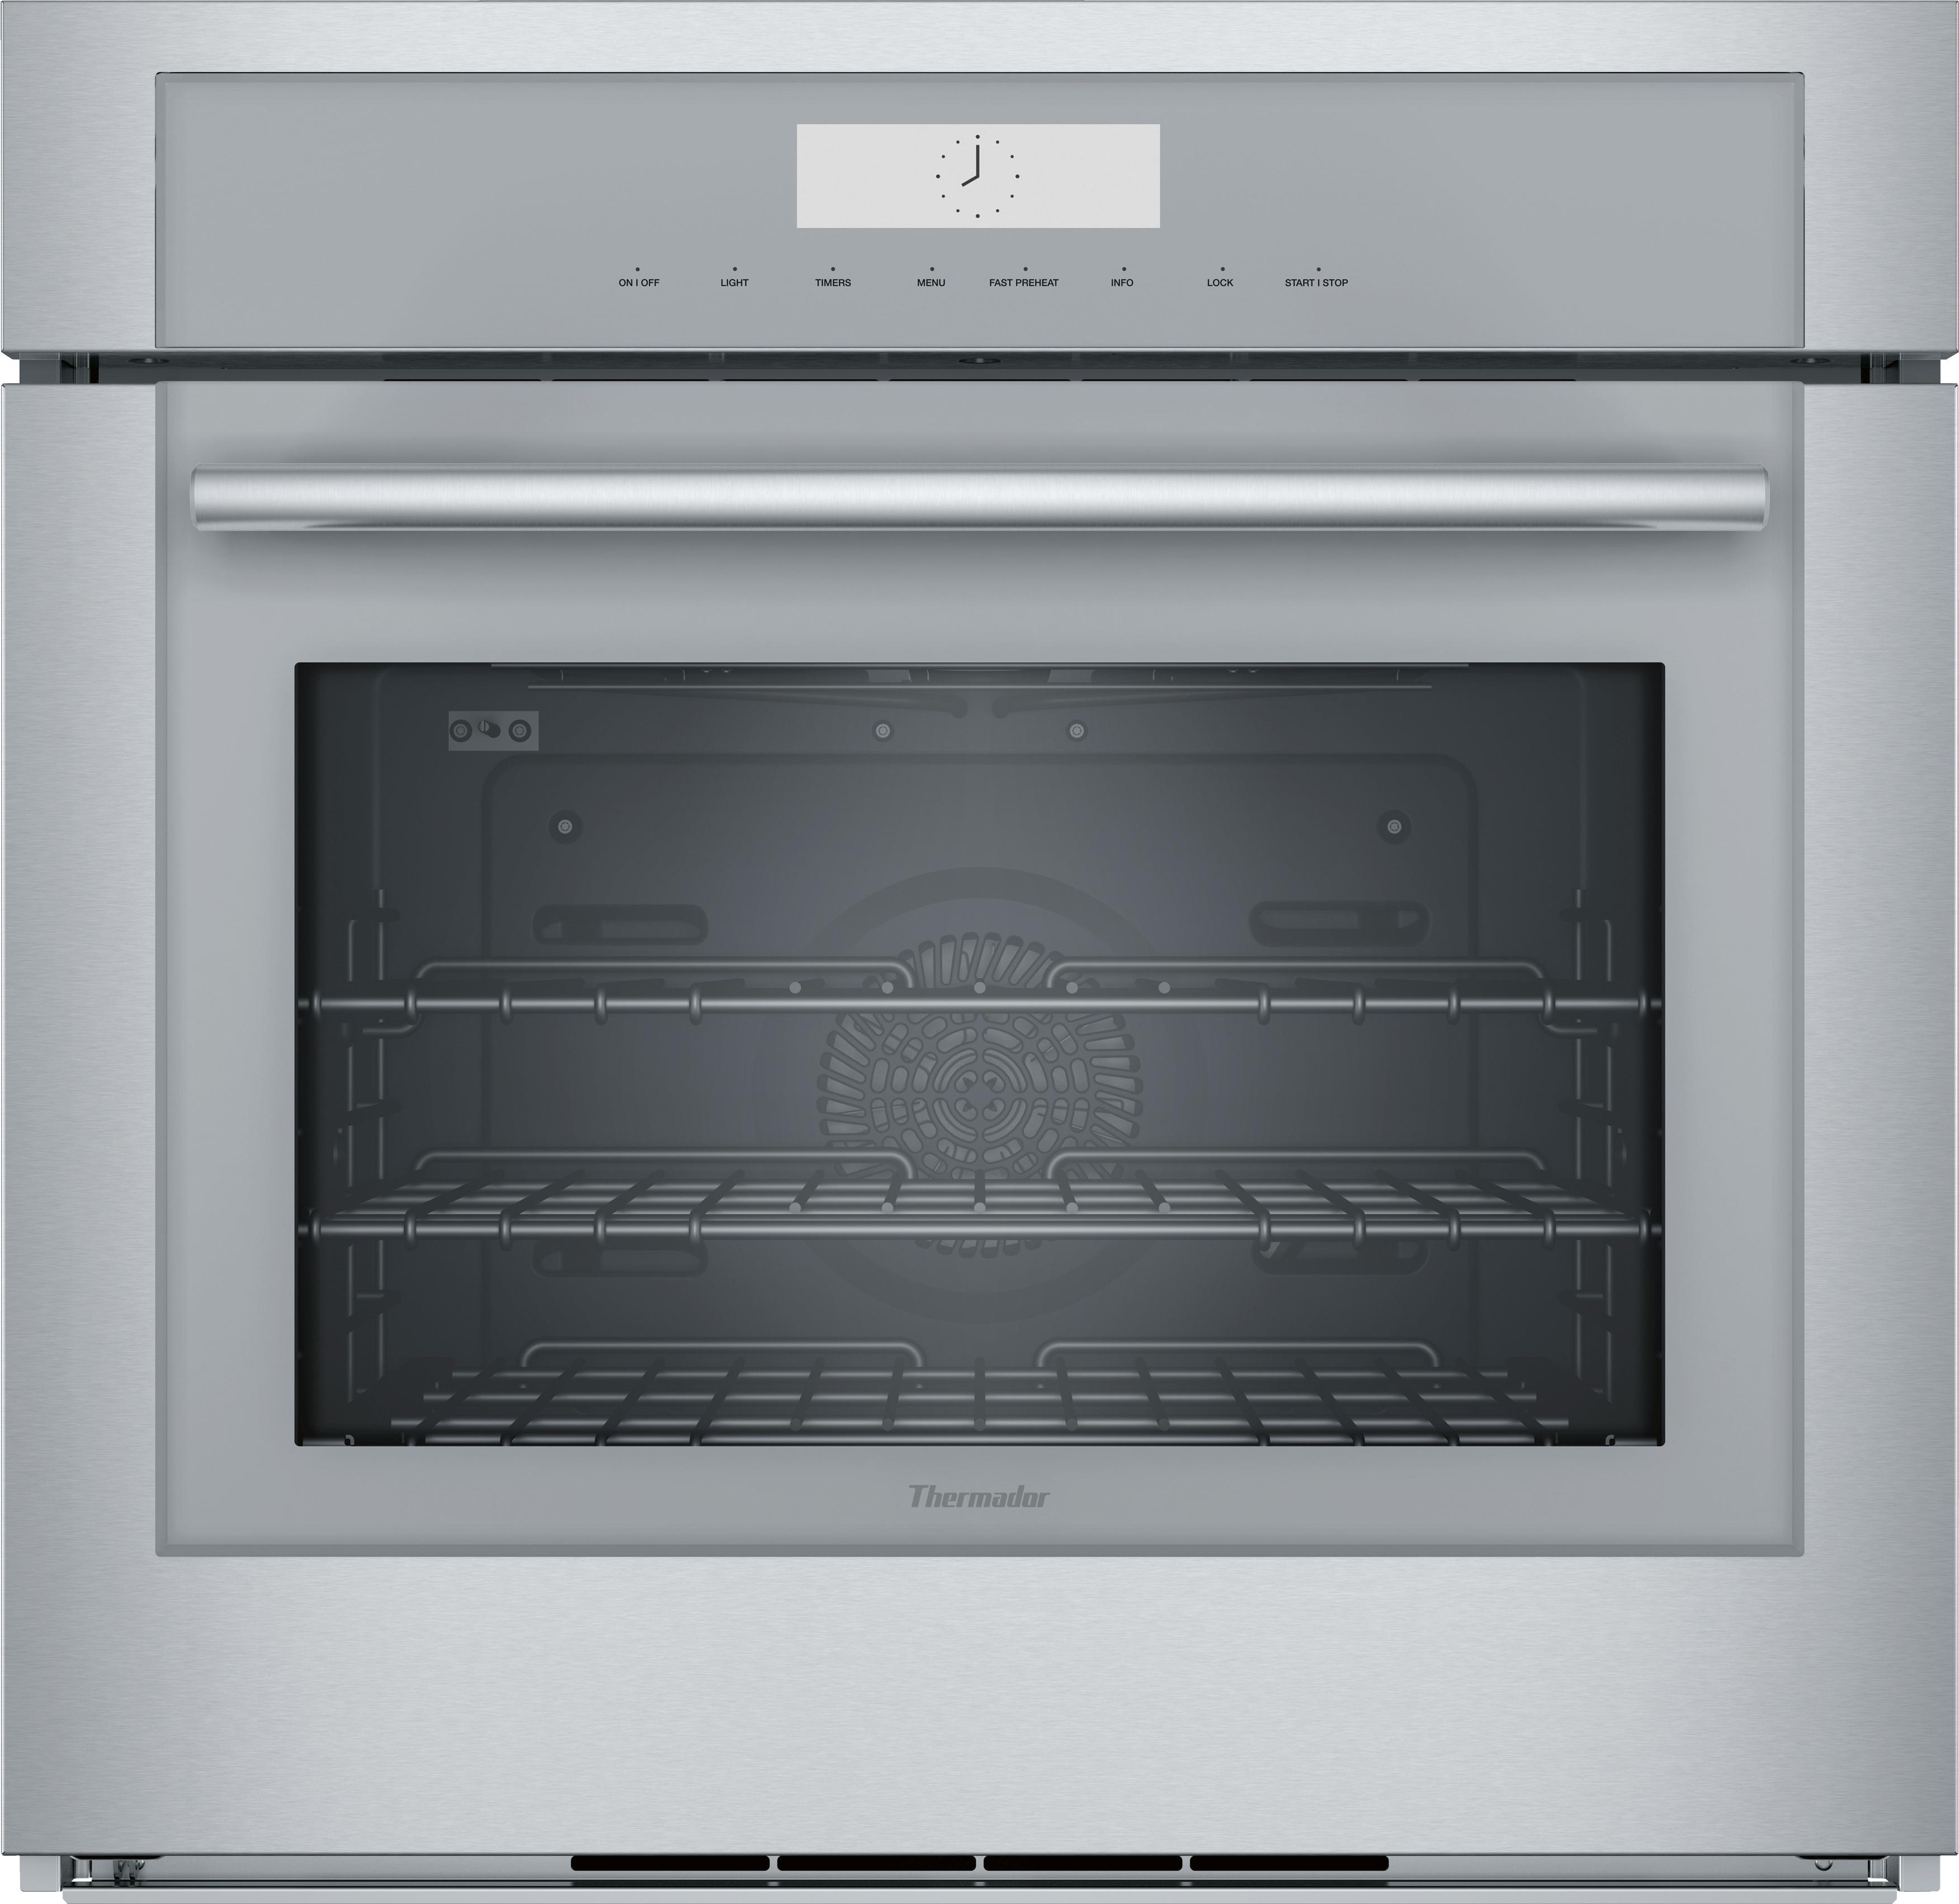 Stock photo of a stainless steel Thermador electric built in oven. 